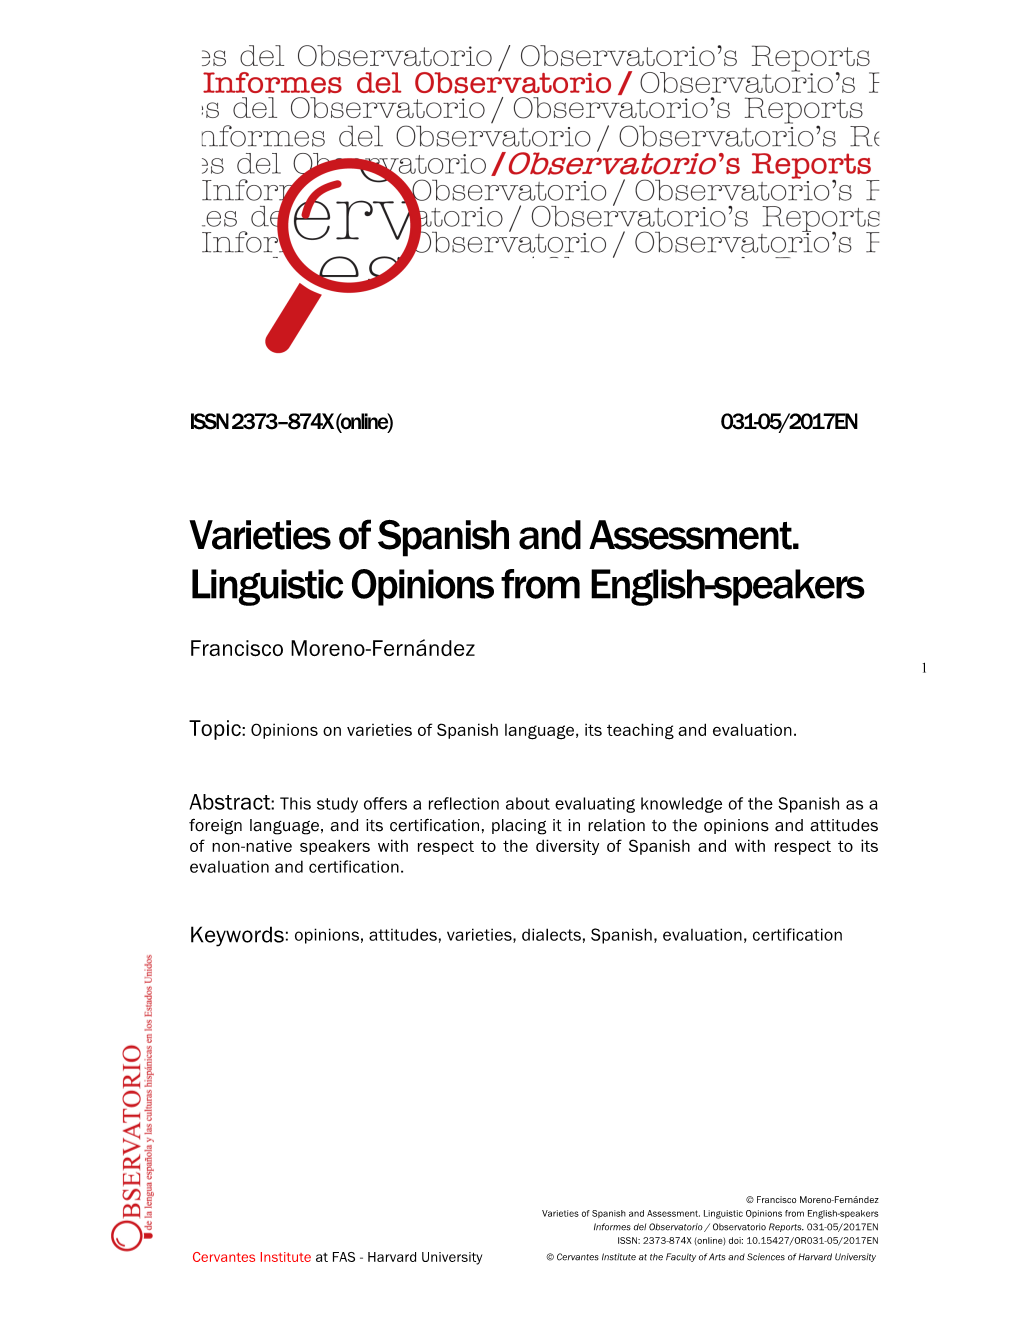 Varieties of Spanish and Assessment. Linguistic Opinions from English-Speakers